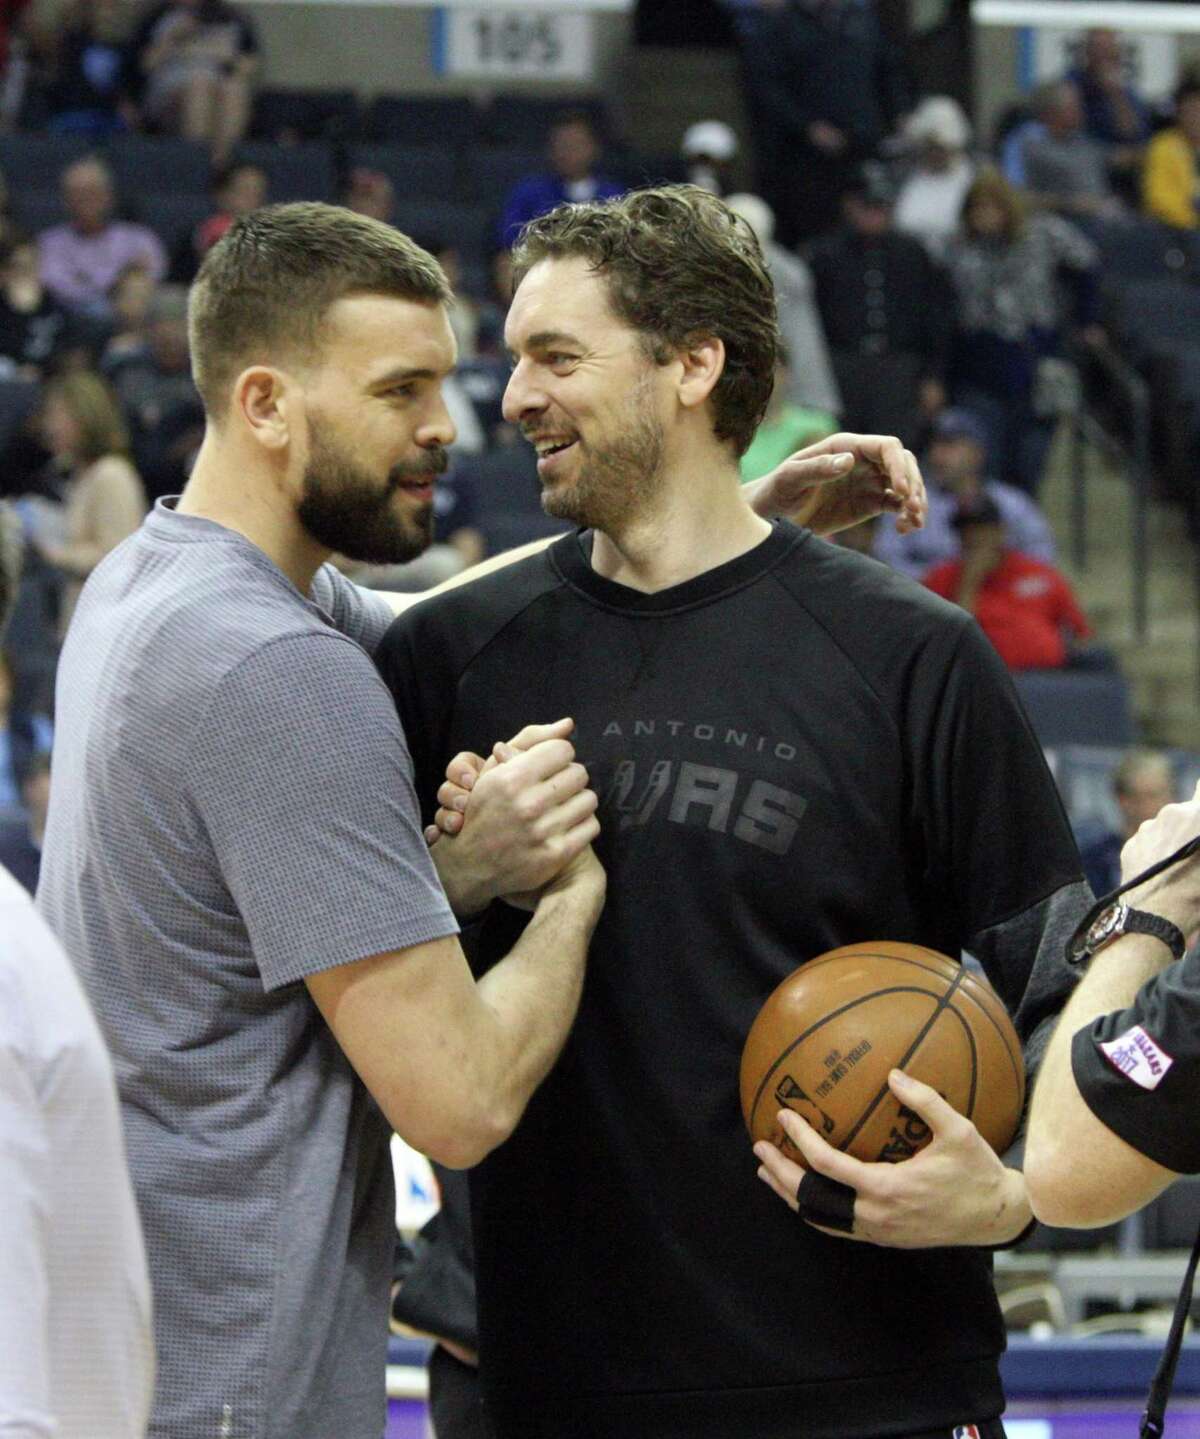 Spurs’ Pau Gasol is embraced by his brother, Grizzlies’ Marc Gasol, prior to the gameon March 18, 2017, in Memphis, Tenn.